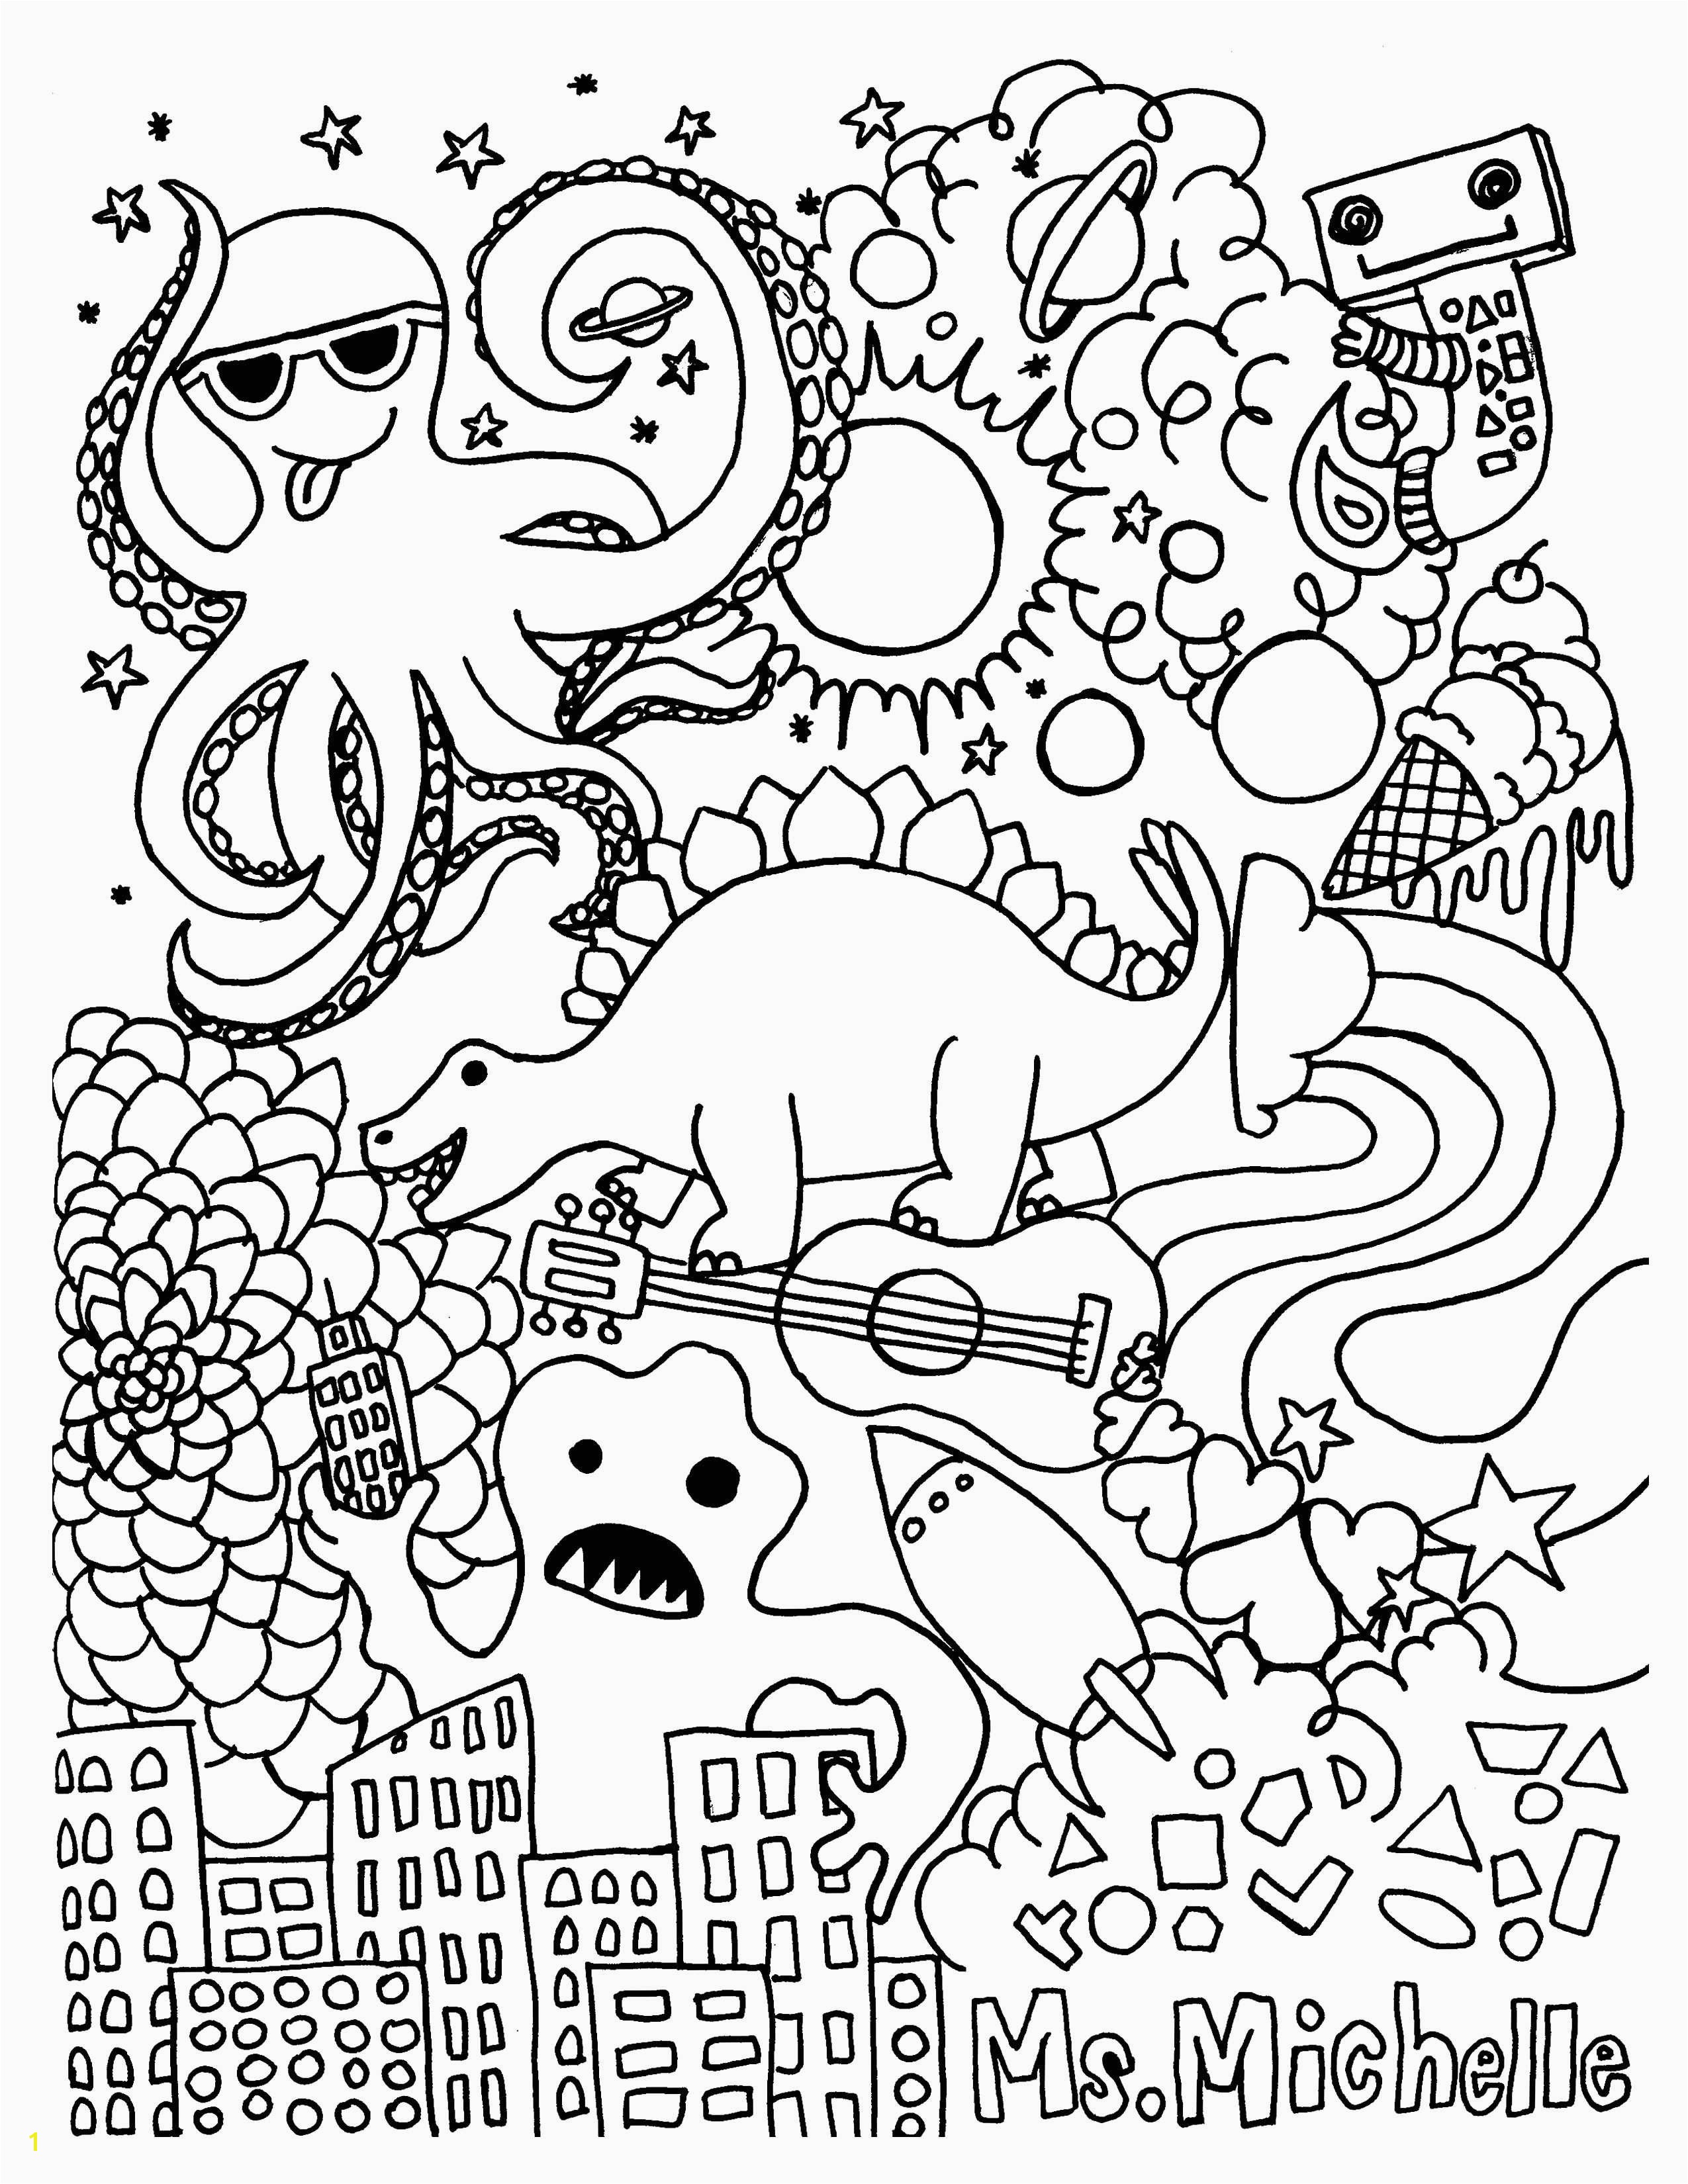 Coloring Pages for Sunday School Abc Coloring Pages Bible 2018 Free Coloring Pages for Halloween